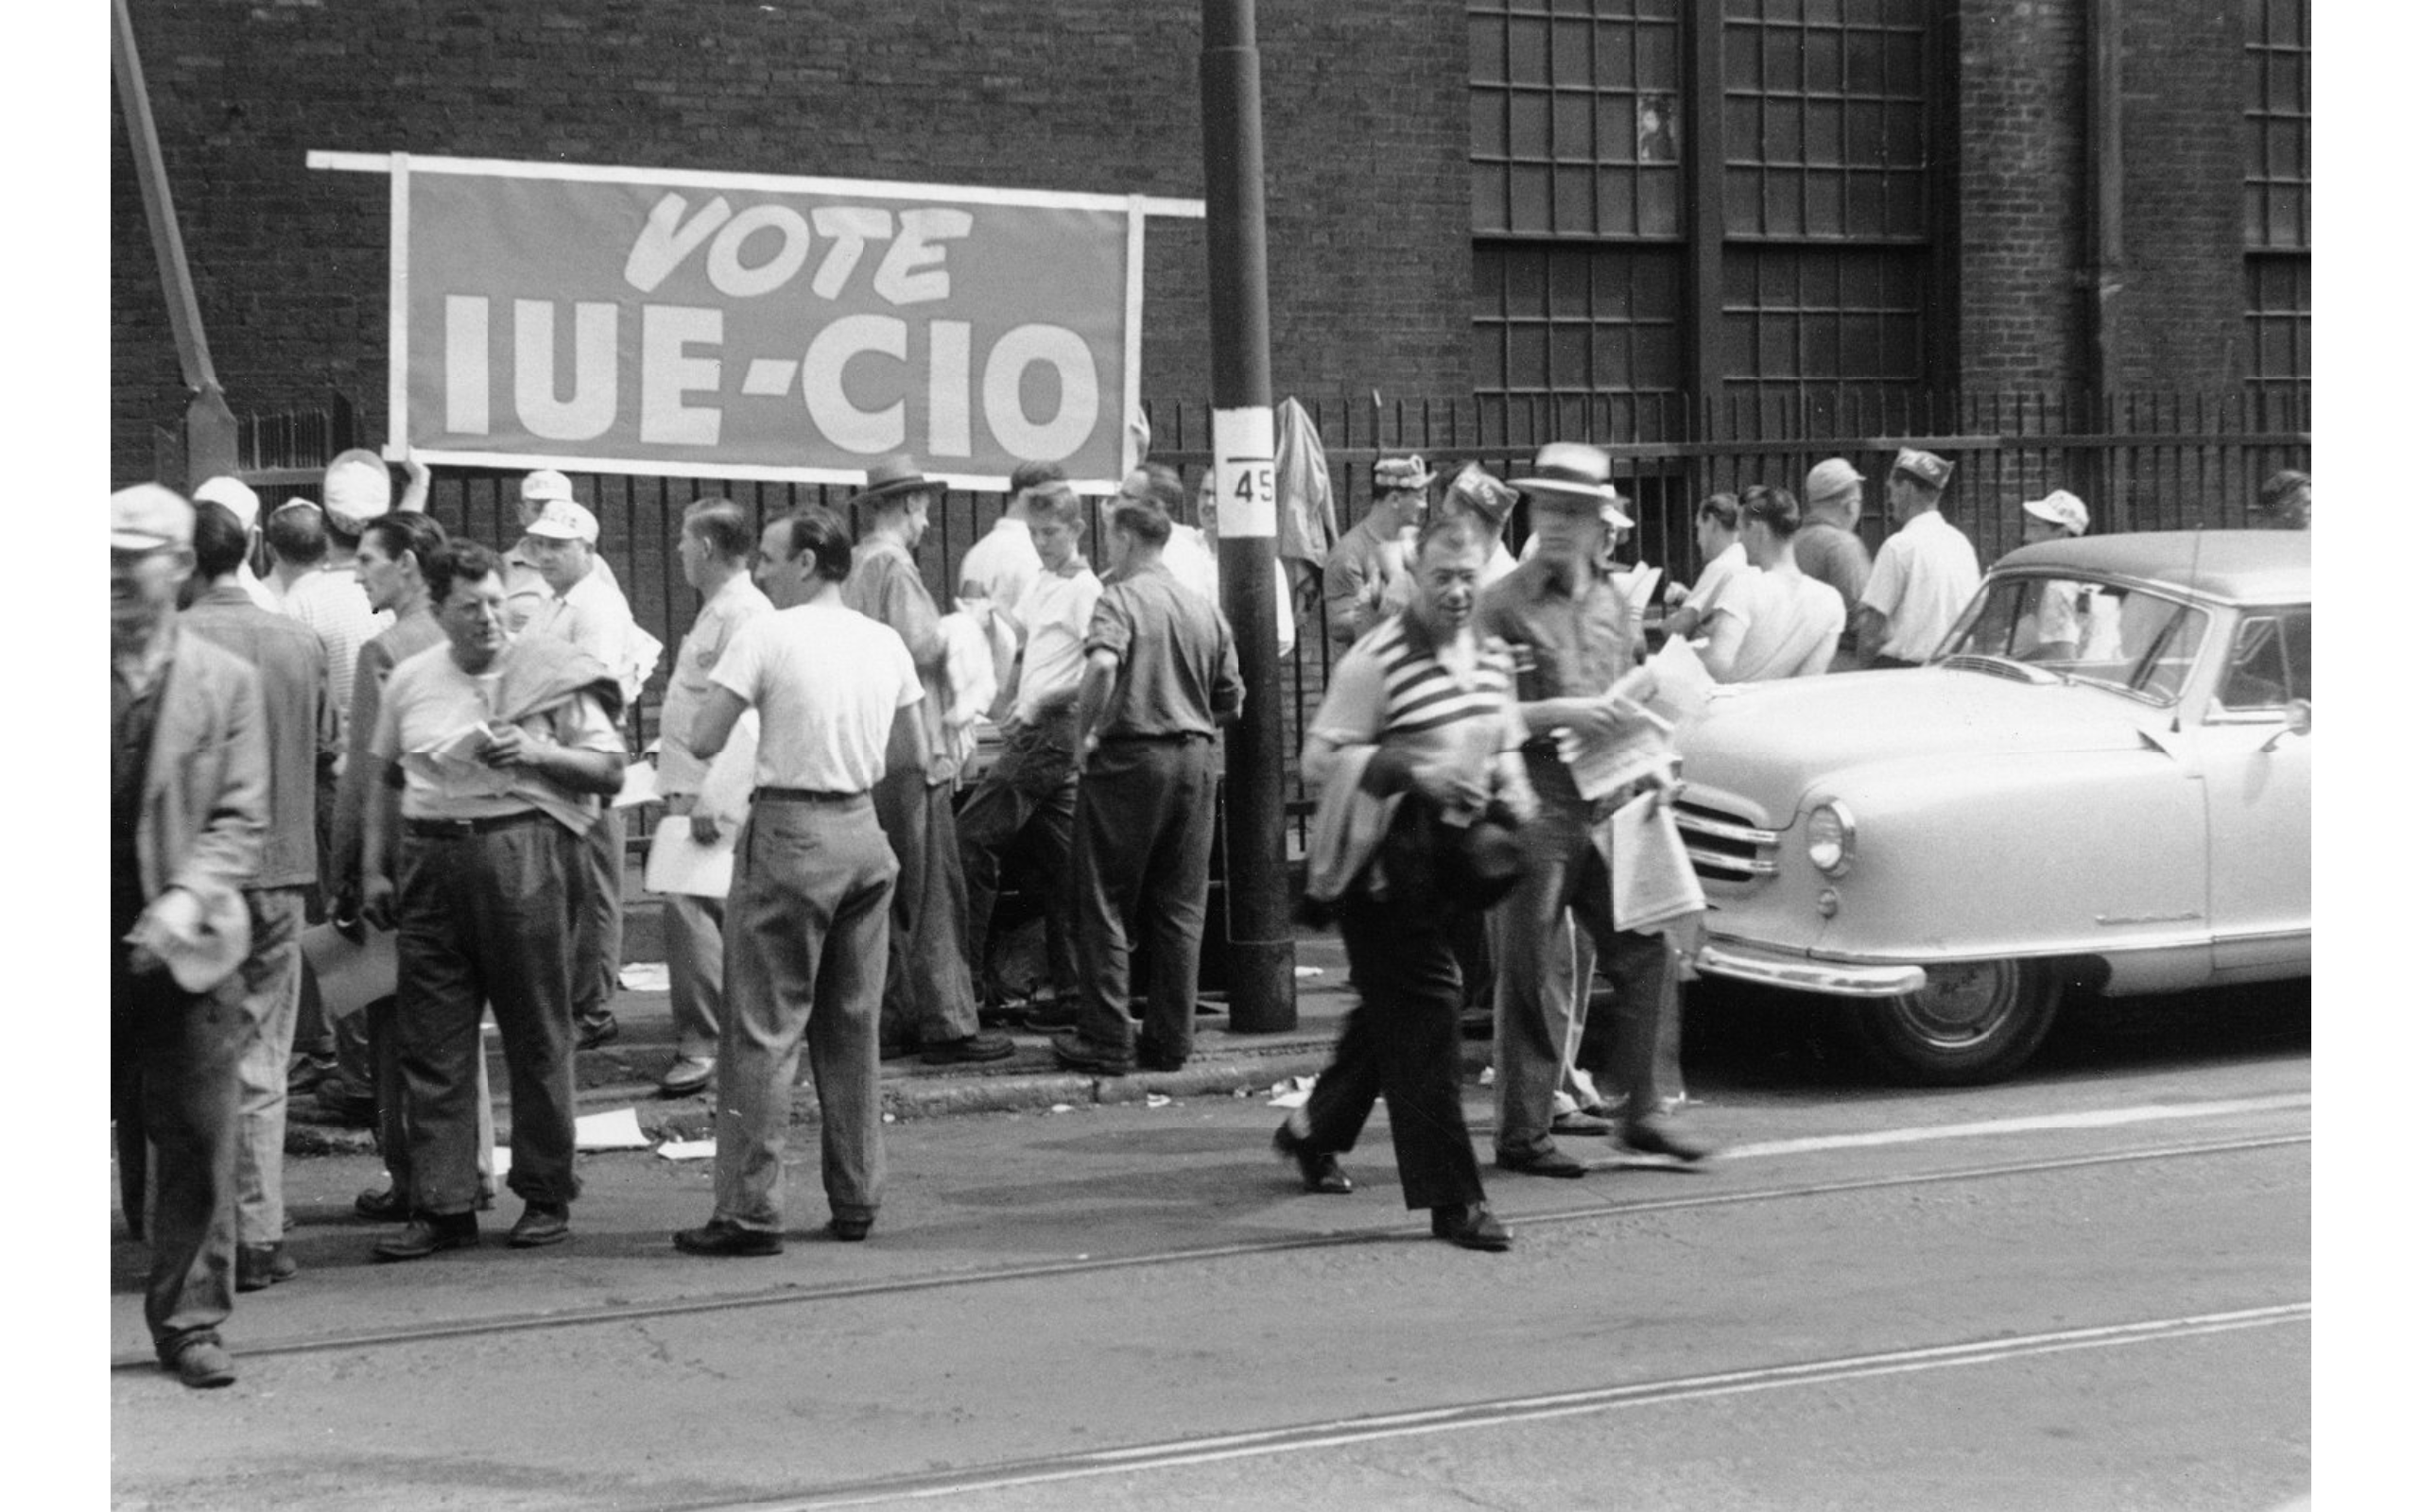 IUE CIO banner on side of Westinghouse plant while workers wait to vote, Pittsburgh, PA, 1949. From University of Pittsburgh digital collection.